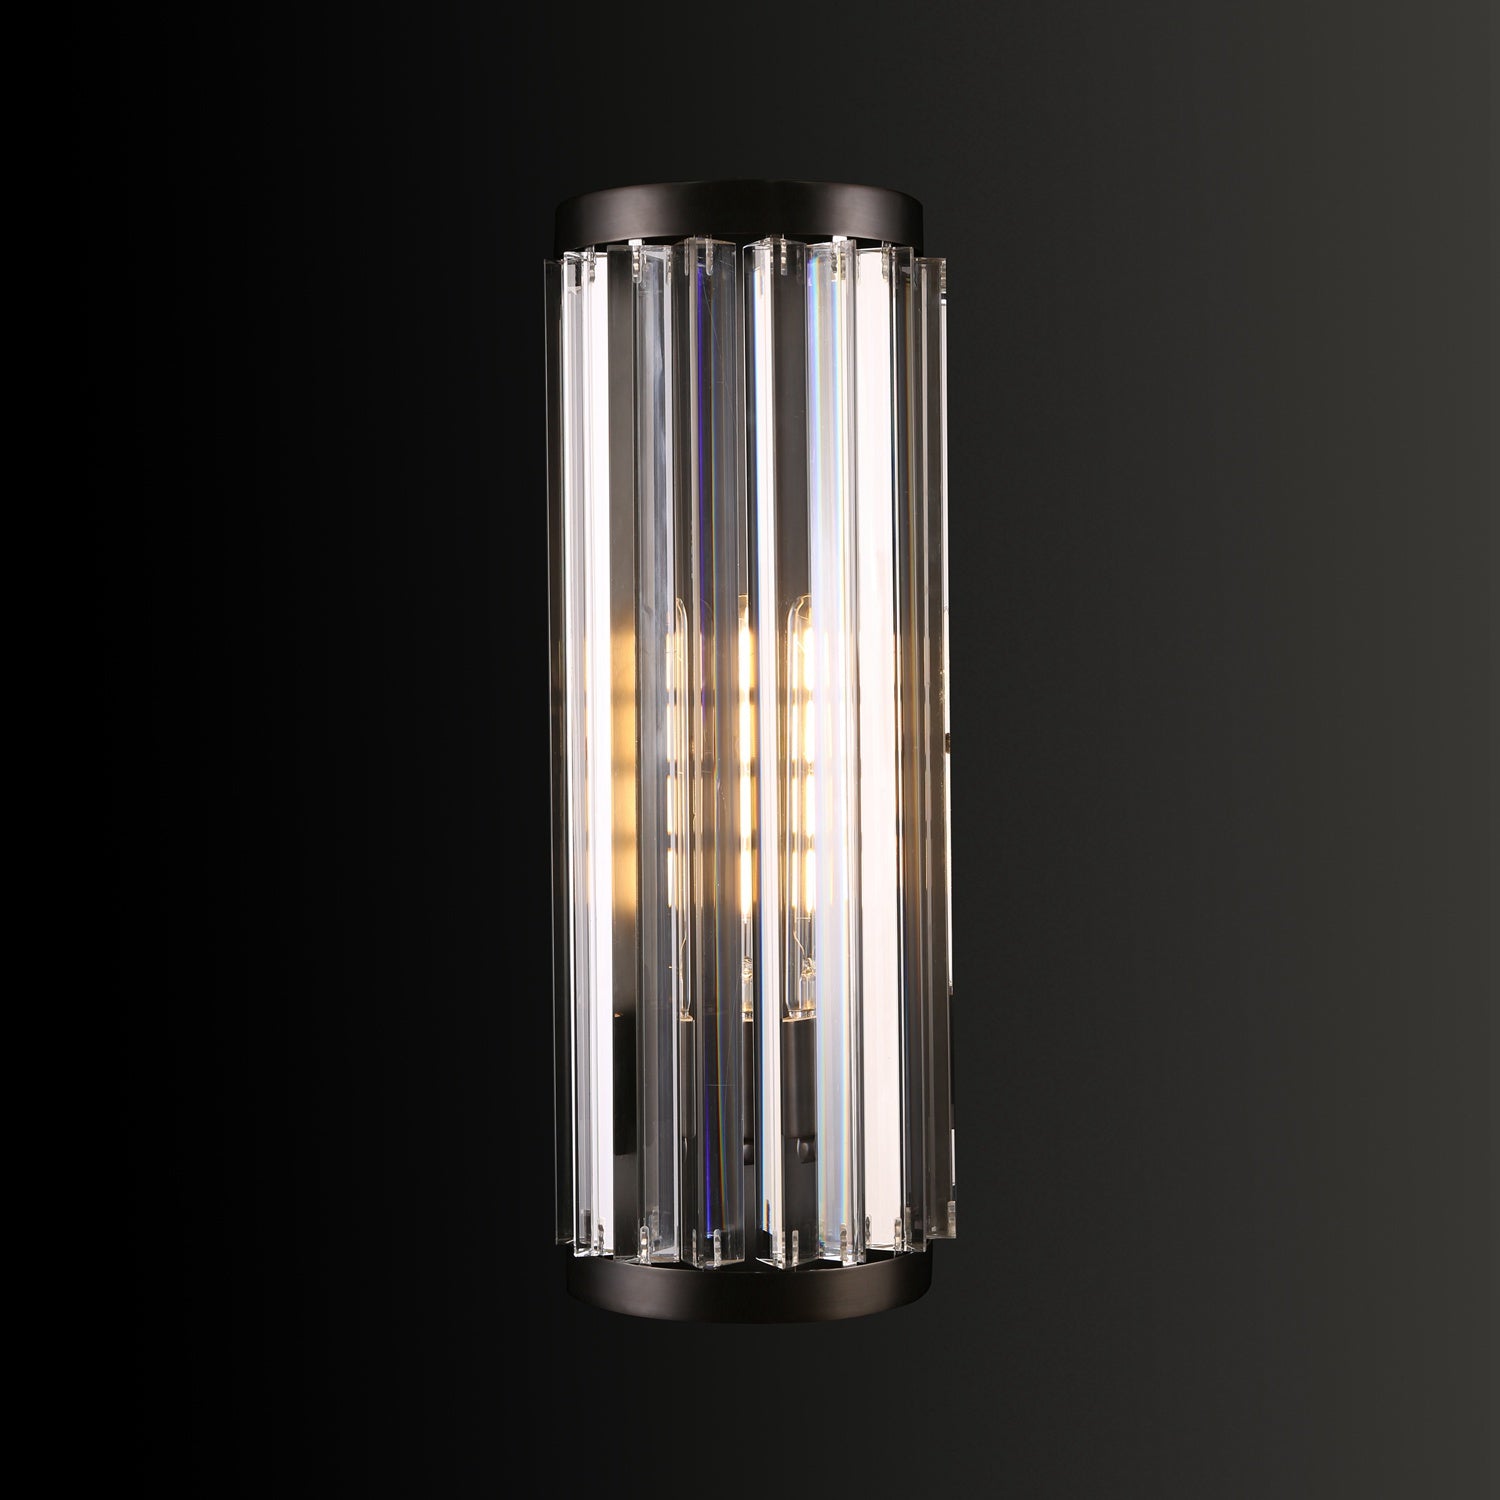 Crystal Wall Lights, Culaccino Black Wall Sconce, Wall Lights for Living Room - Wing Lightings